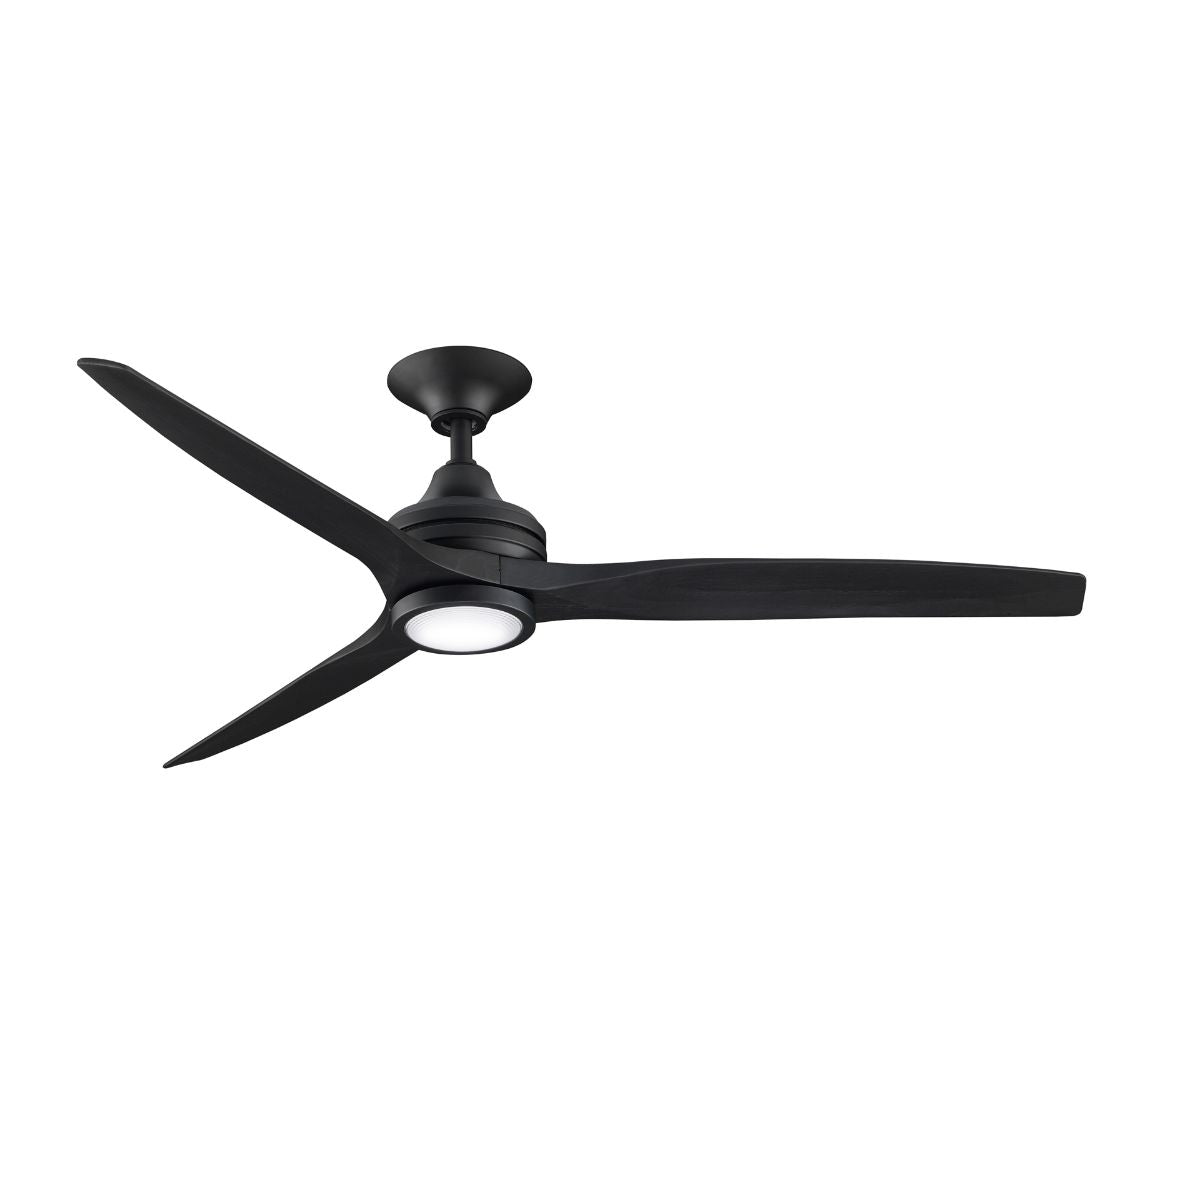 Spitfire DC Outdoor Ceiling Fan Motor With Remote, Black Finish, Set of 3 Blades Sold Separately